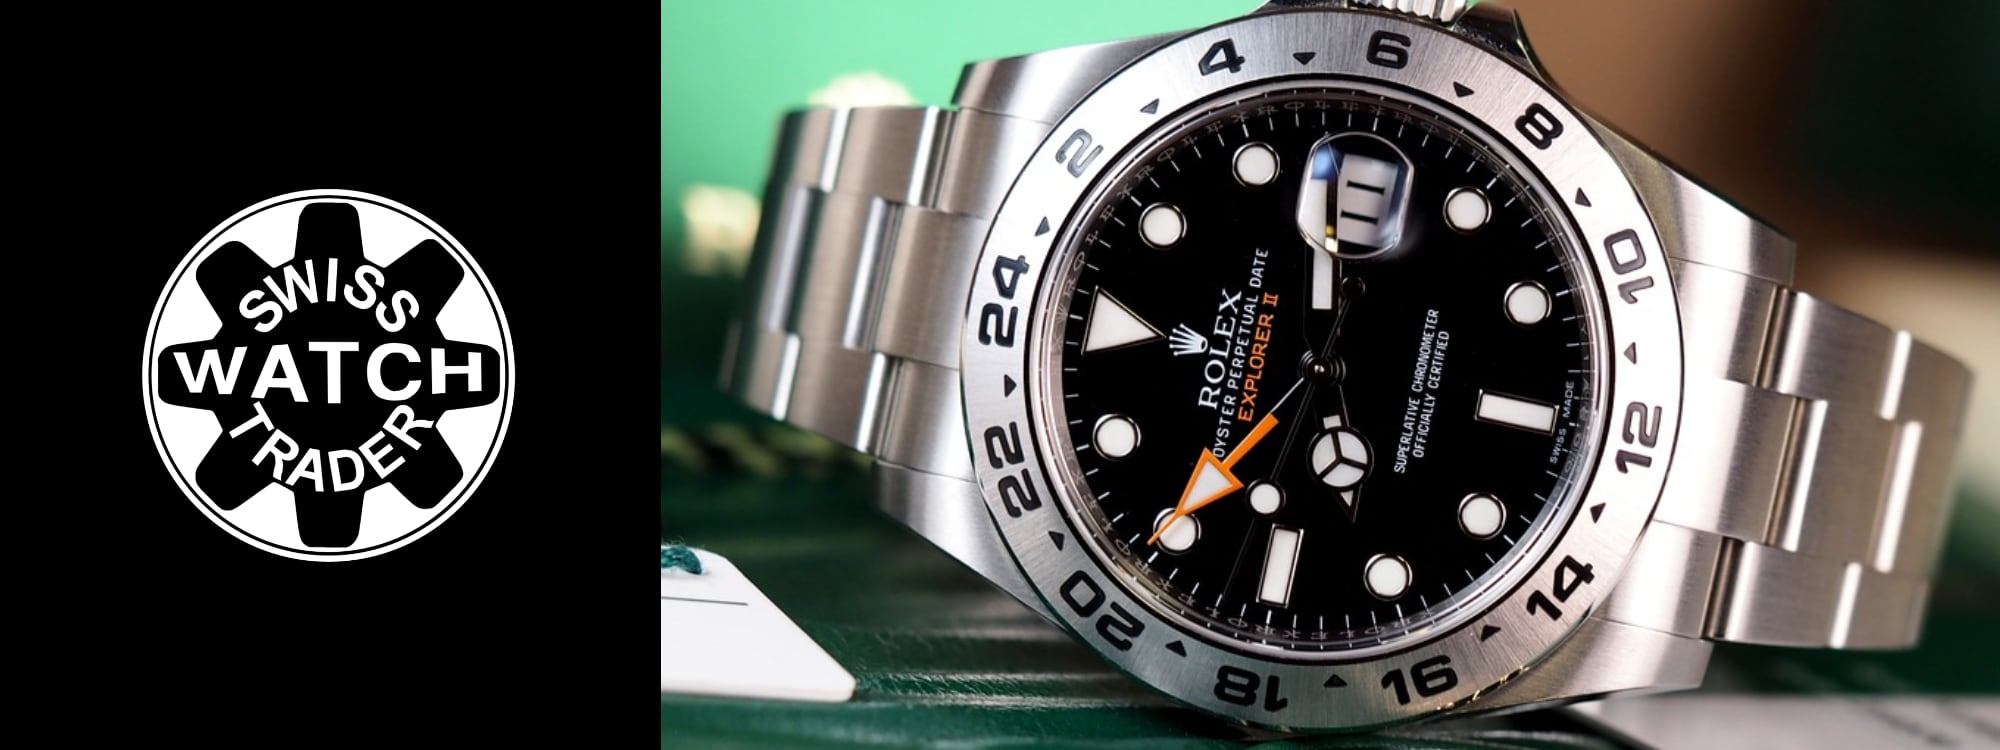 Rolex Explorer II 16570 and 216570 Watches For Sale